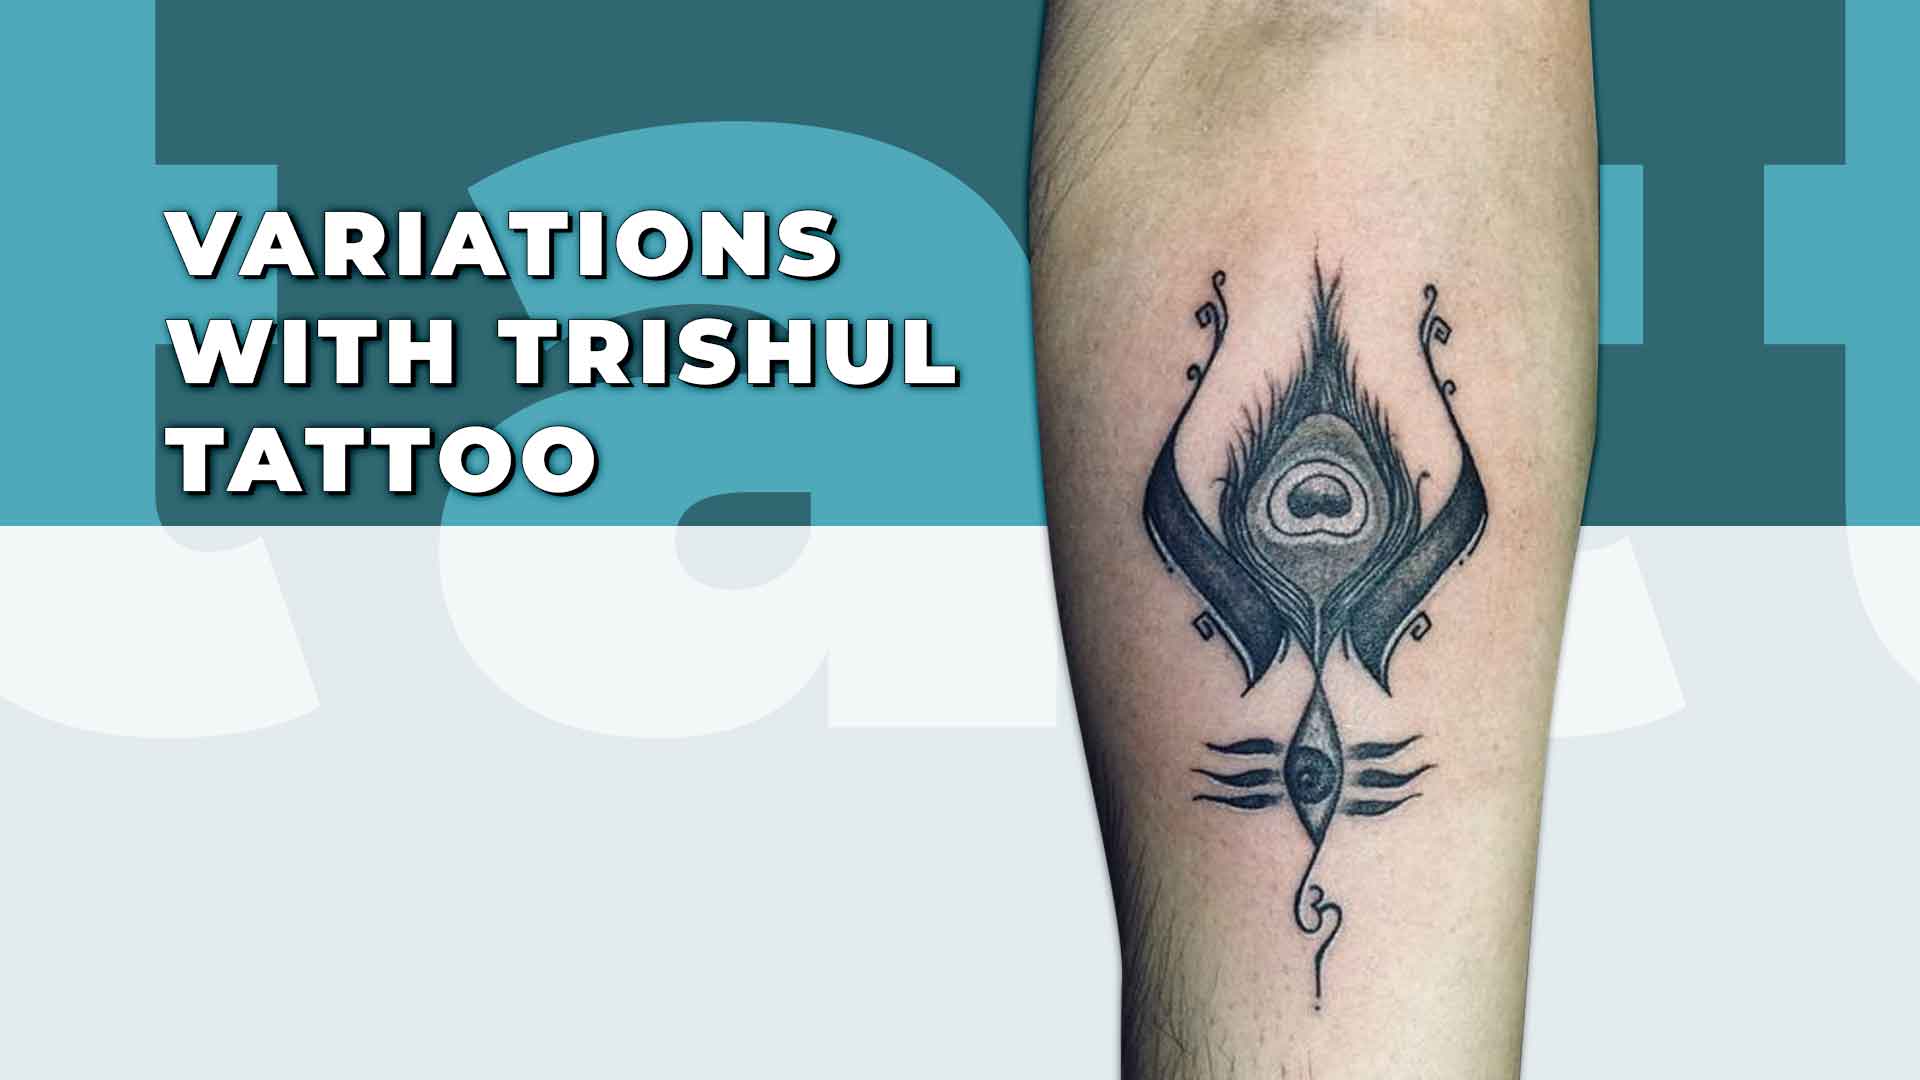 Discover Om Symbol With Trishul Tattoo on Forearm - Black Poison Tattoos